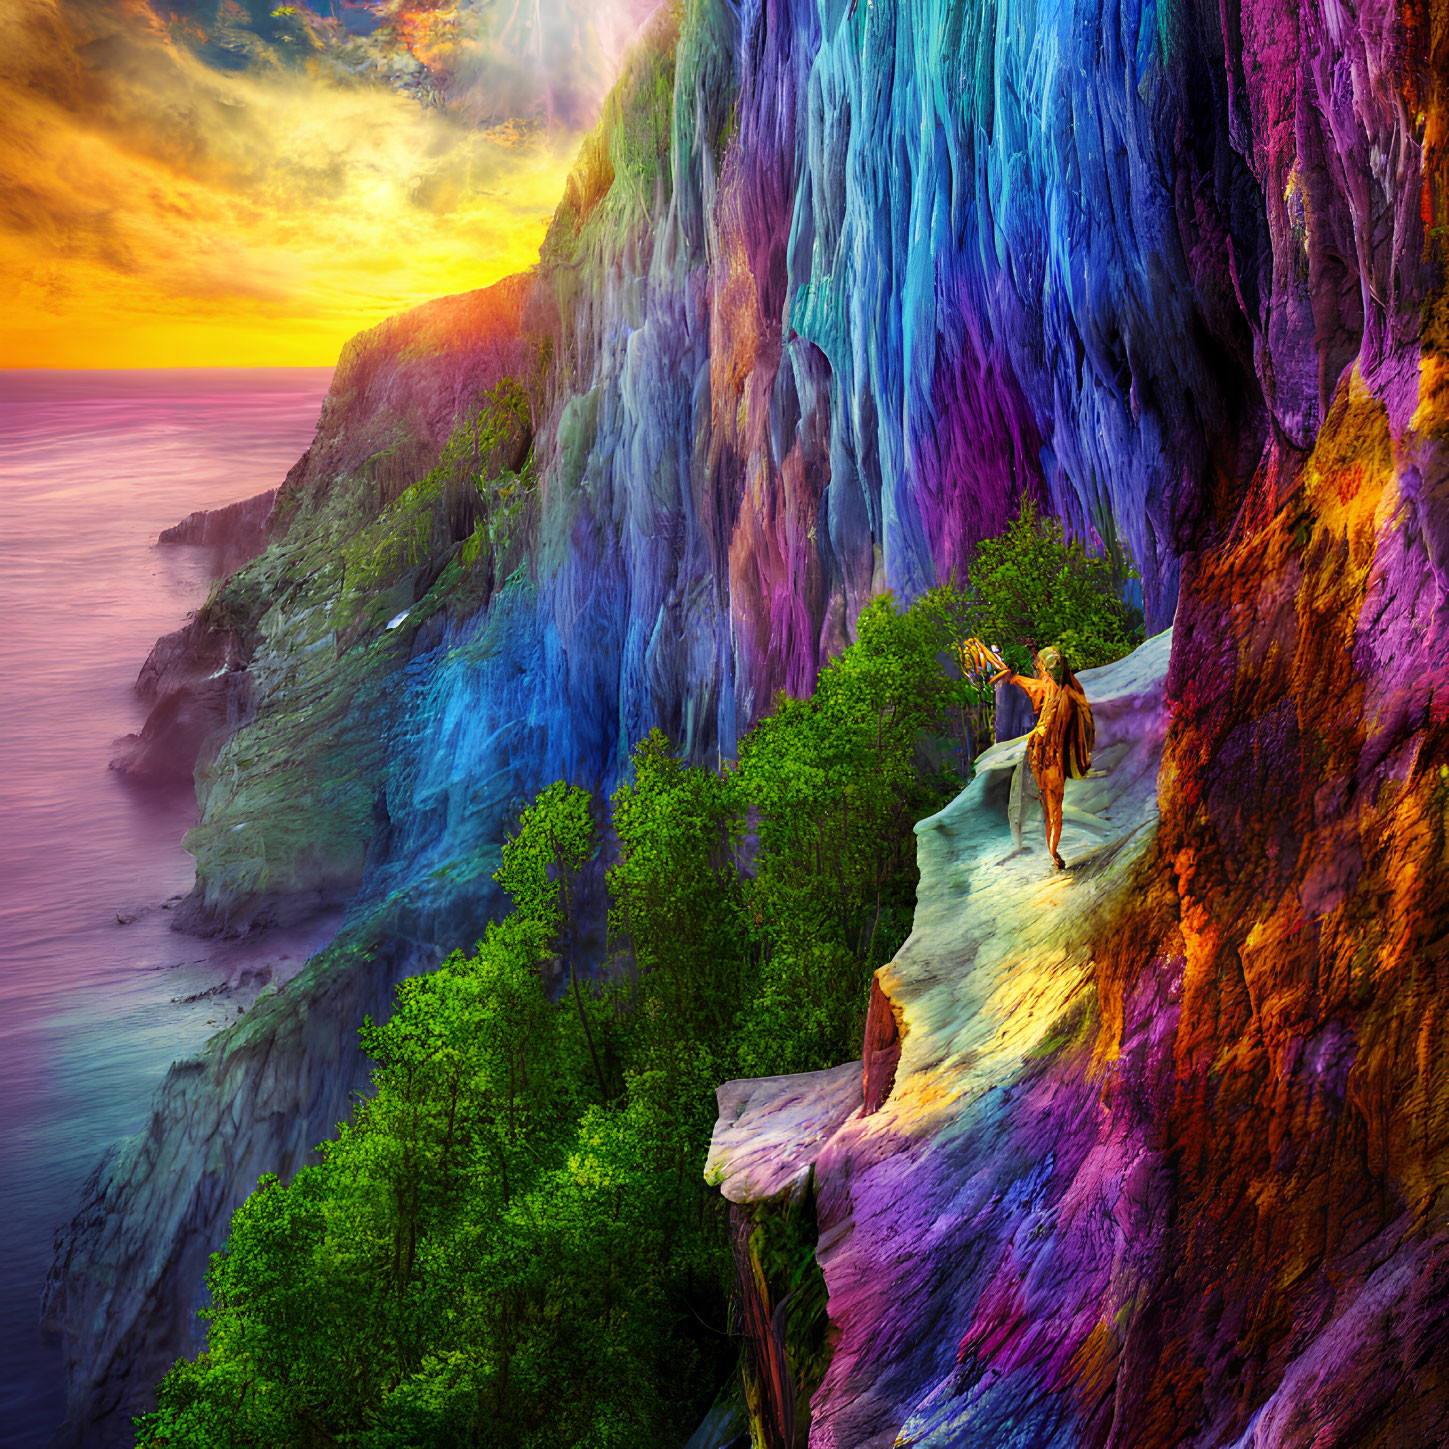 Colorful Waterfall on Vibrant Cliffside Overlooking Ocean at Sunset